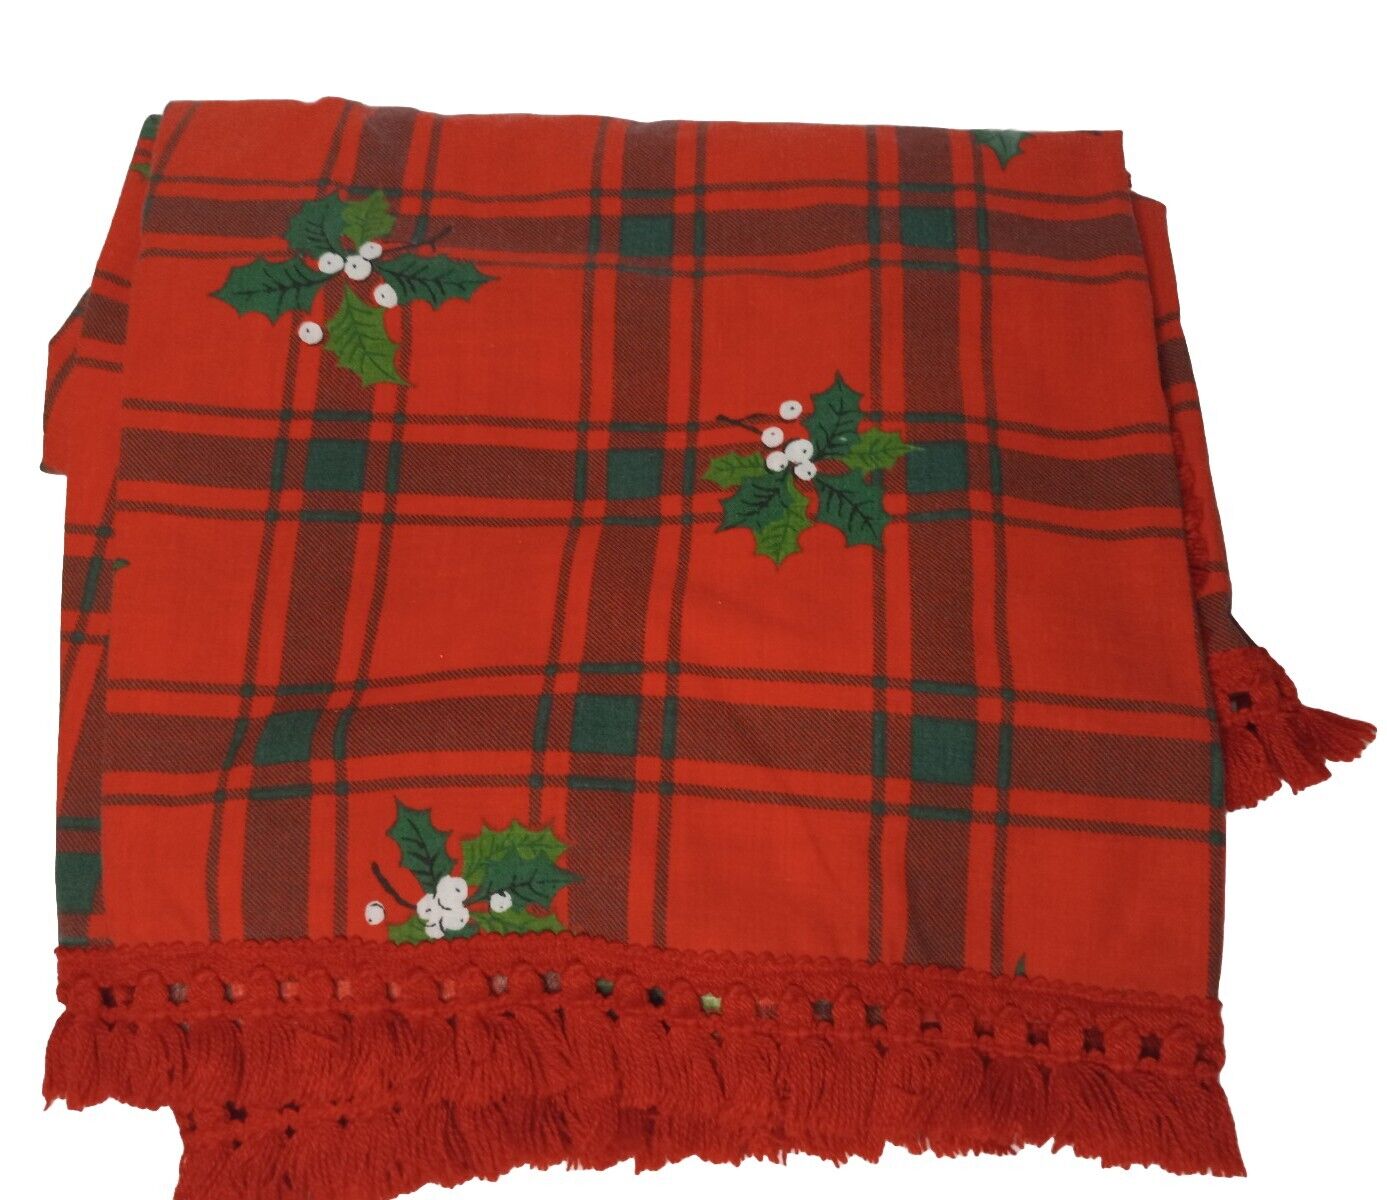 Vintage Red Holly Christmas Tablecloth With Tassel Trim Homemade  Rectangular